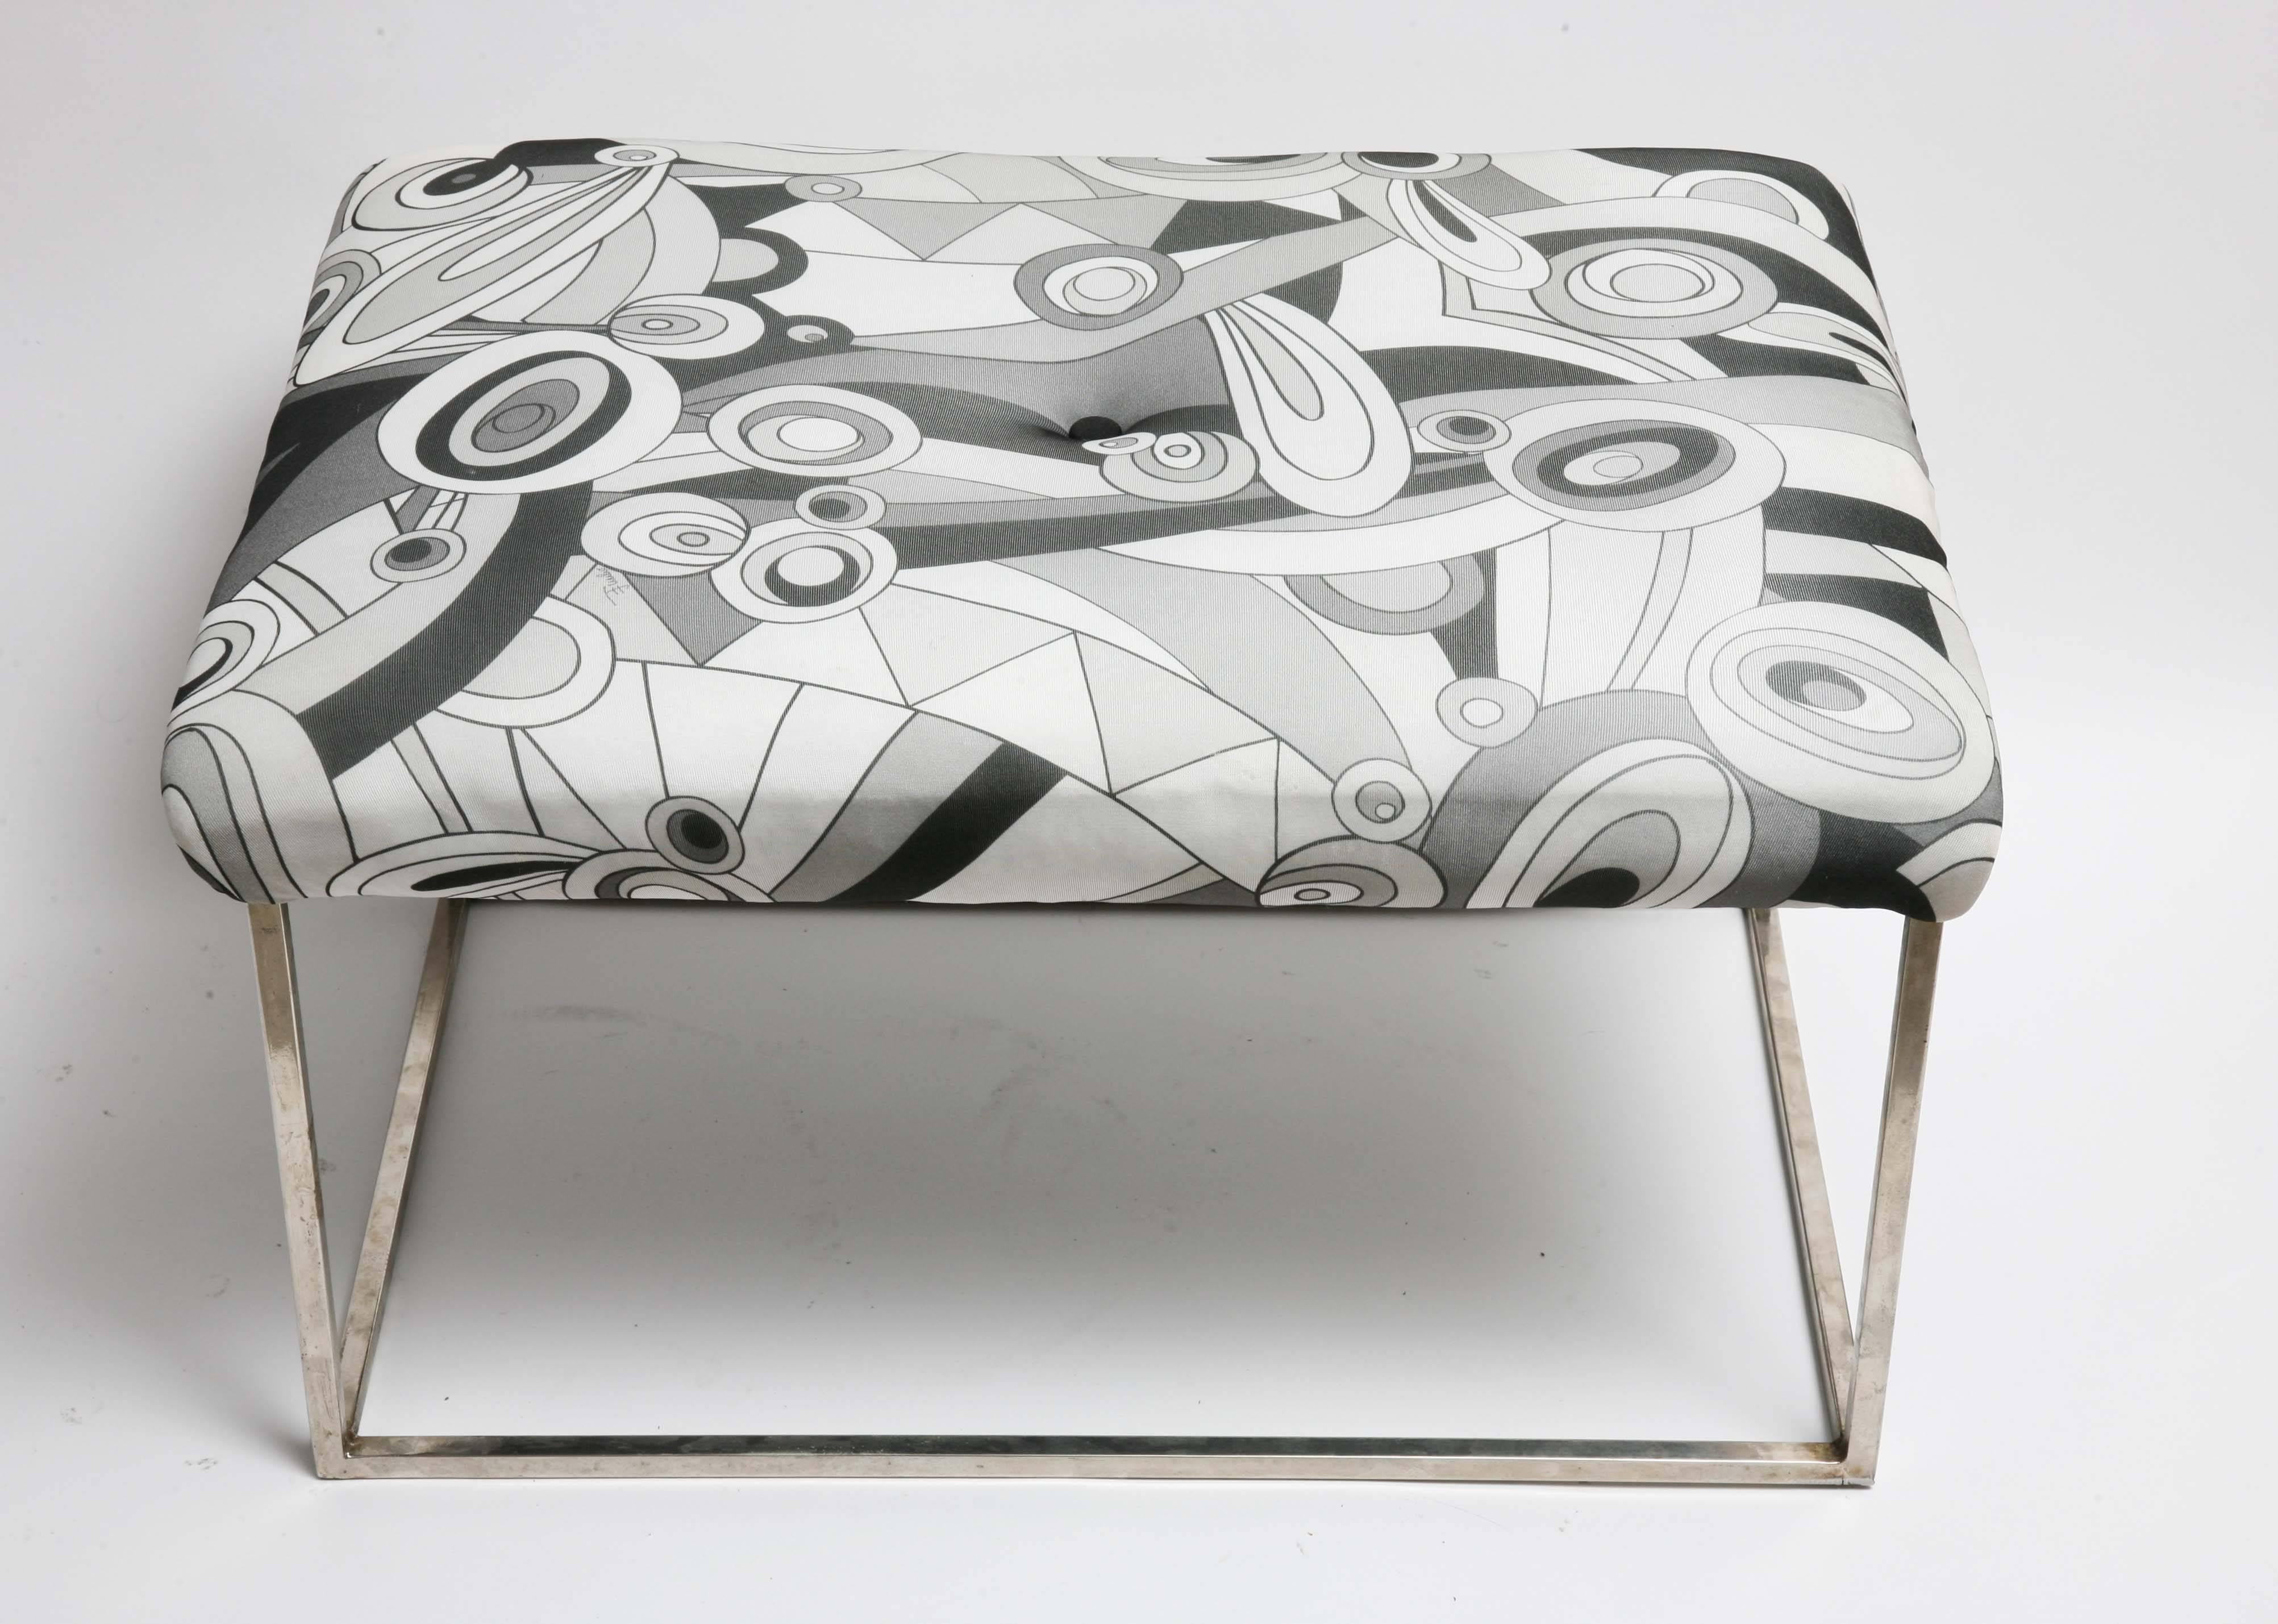 20th Century Pair of Mid-Century Modern Baughman Chrome Pucci Fabric Stools or Benches For Sale